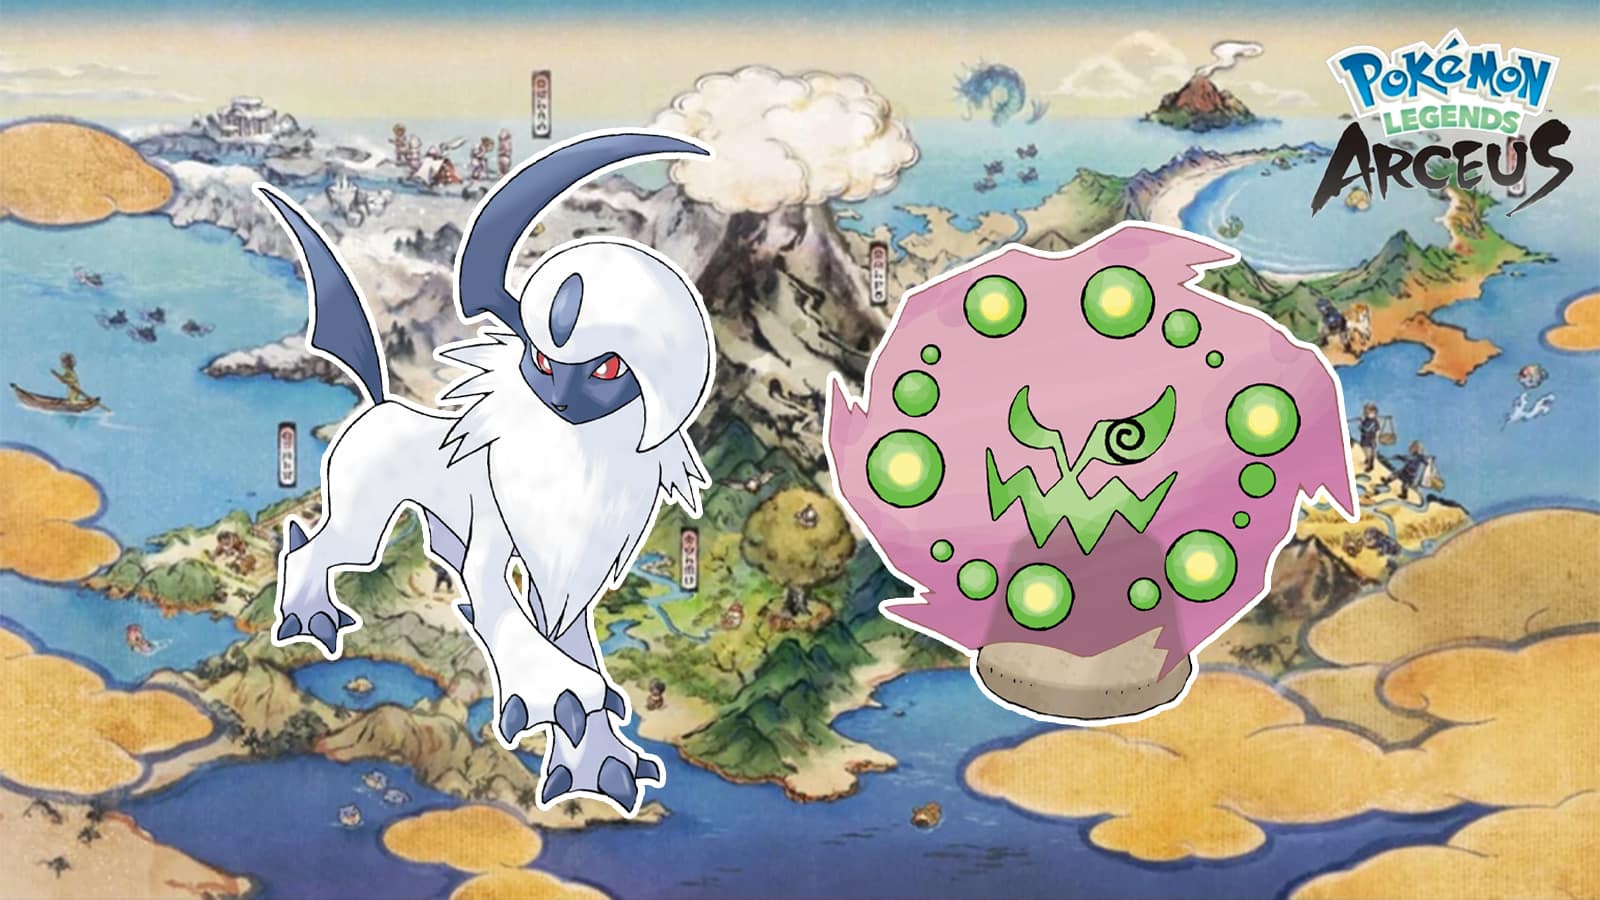 Absol and Spiritomb on the Pokemon Legends Arceus map